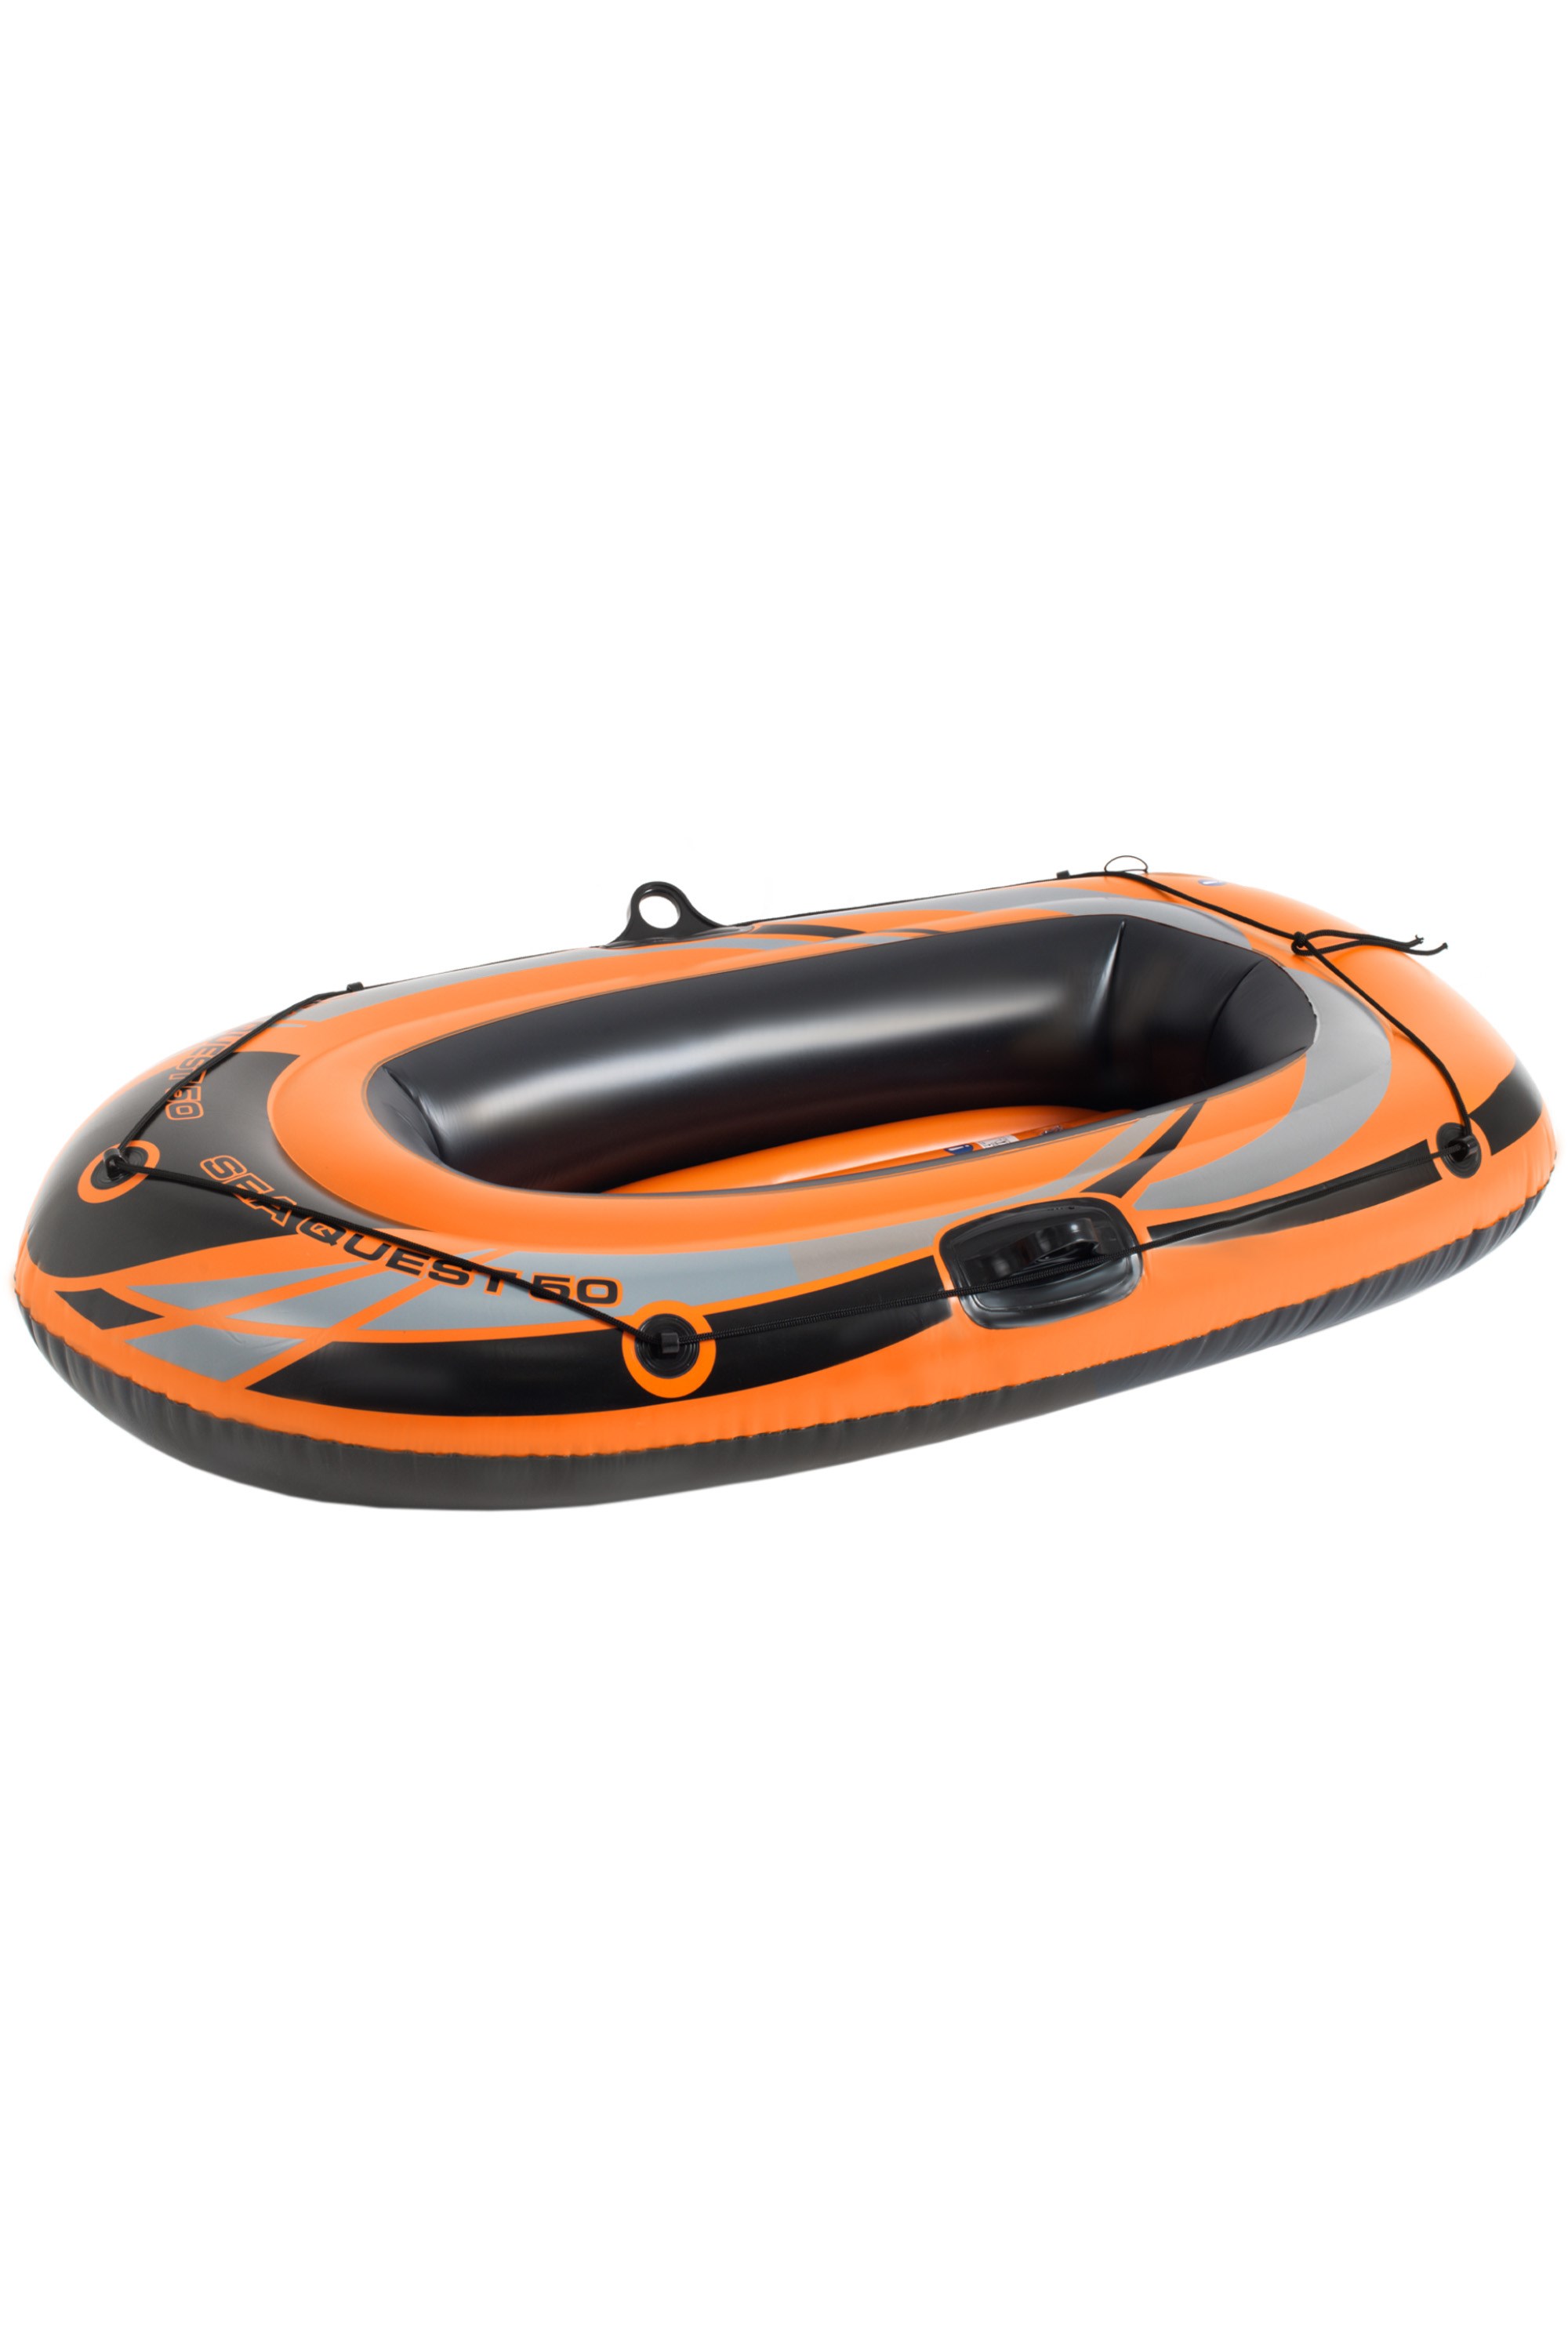 Sea Quest 50 Inflatable Boat -